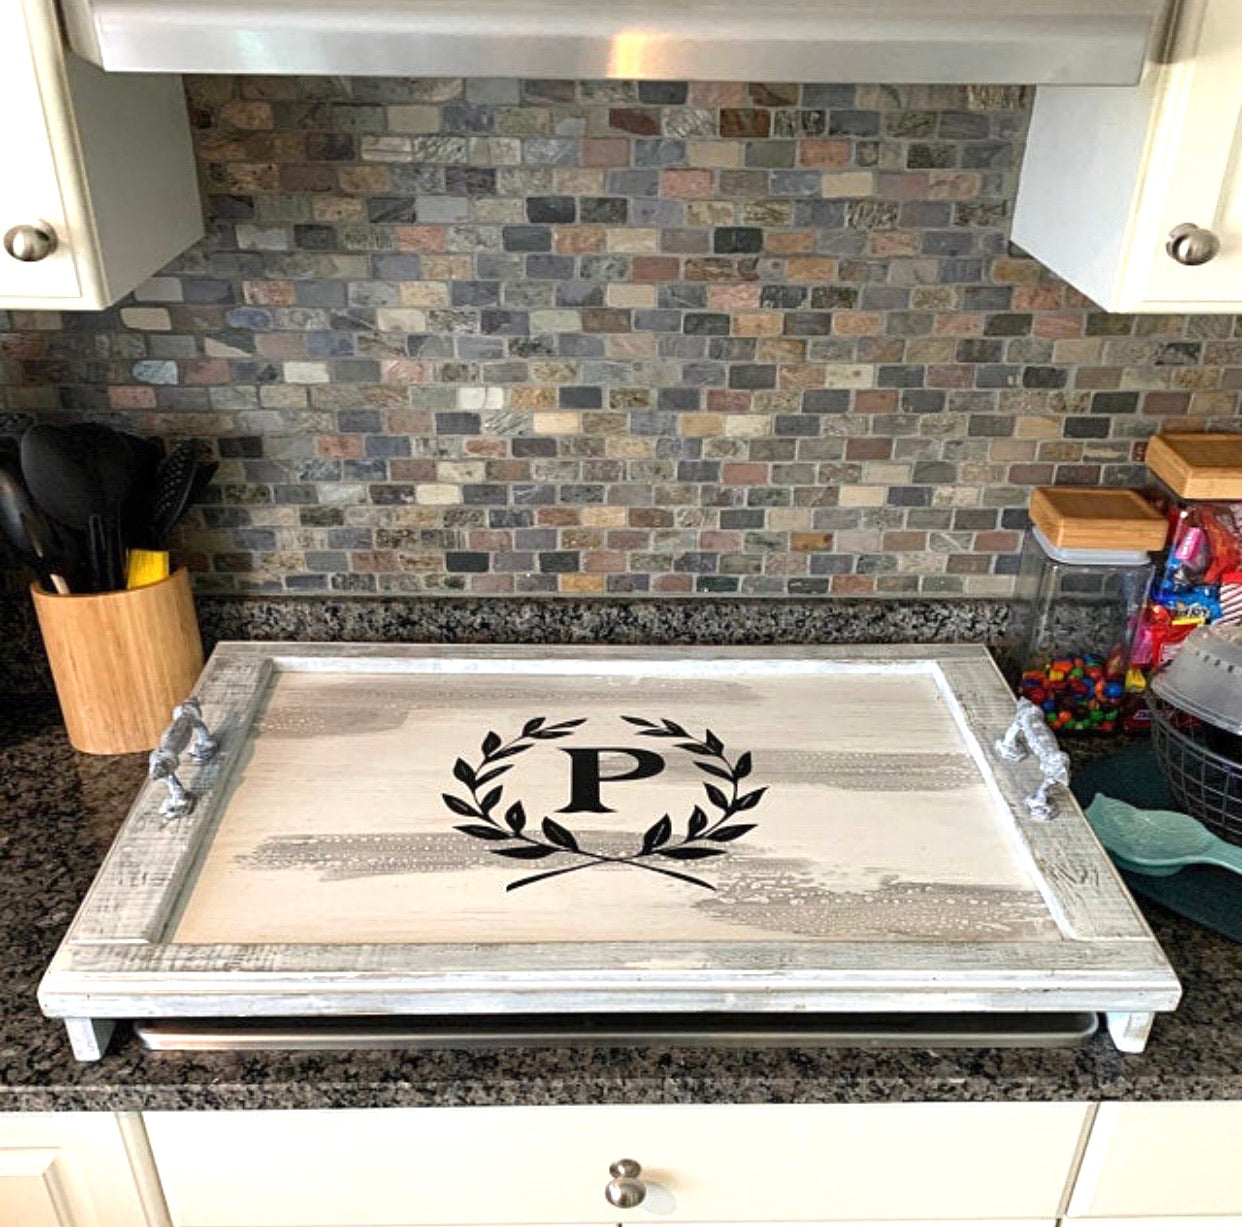 Noodle Tray Stove Top Cover